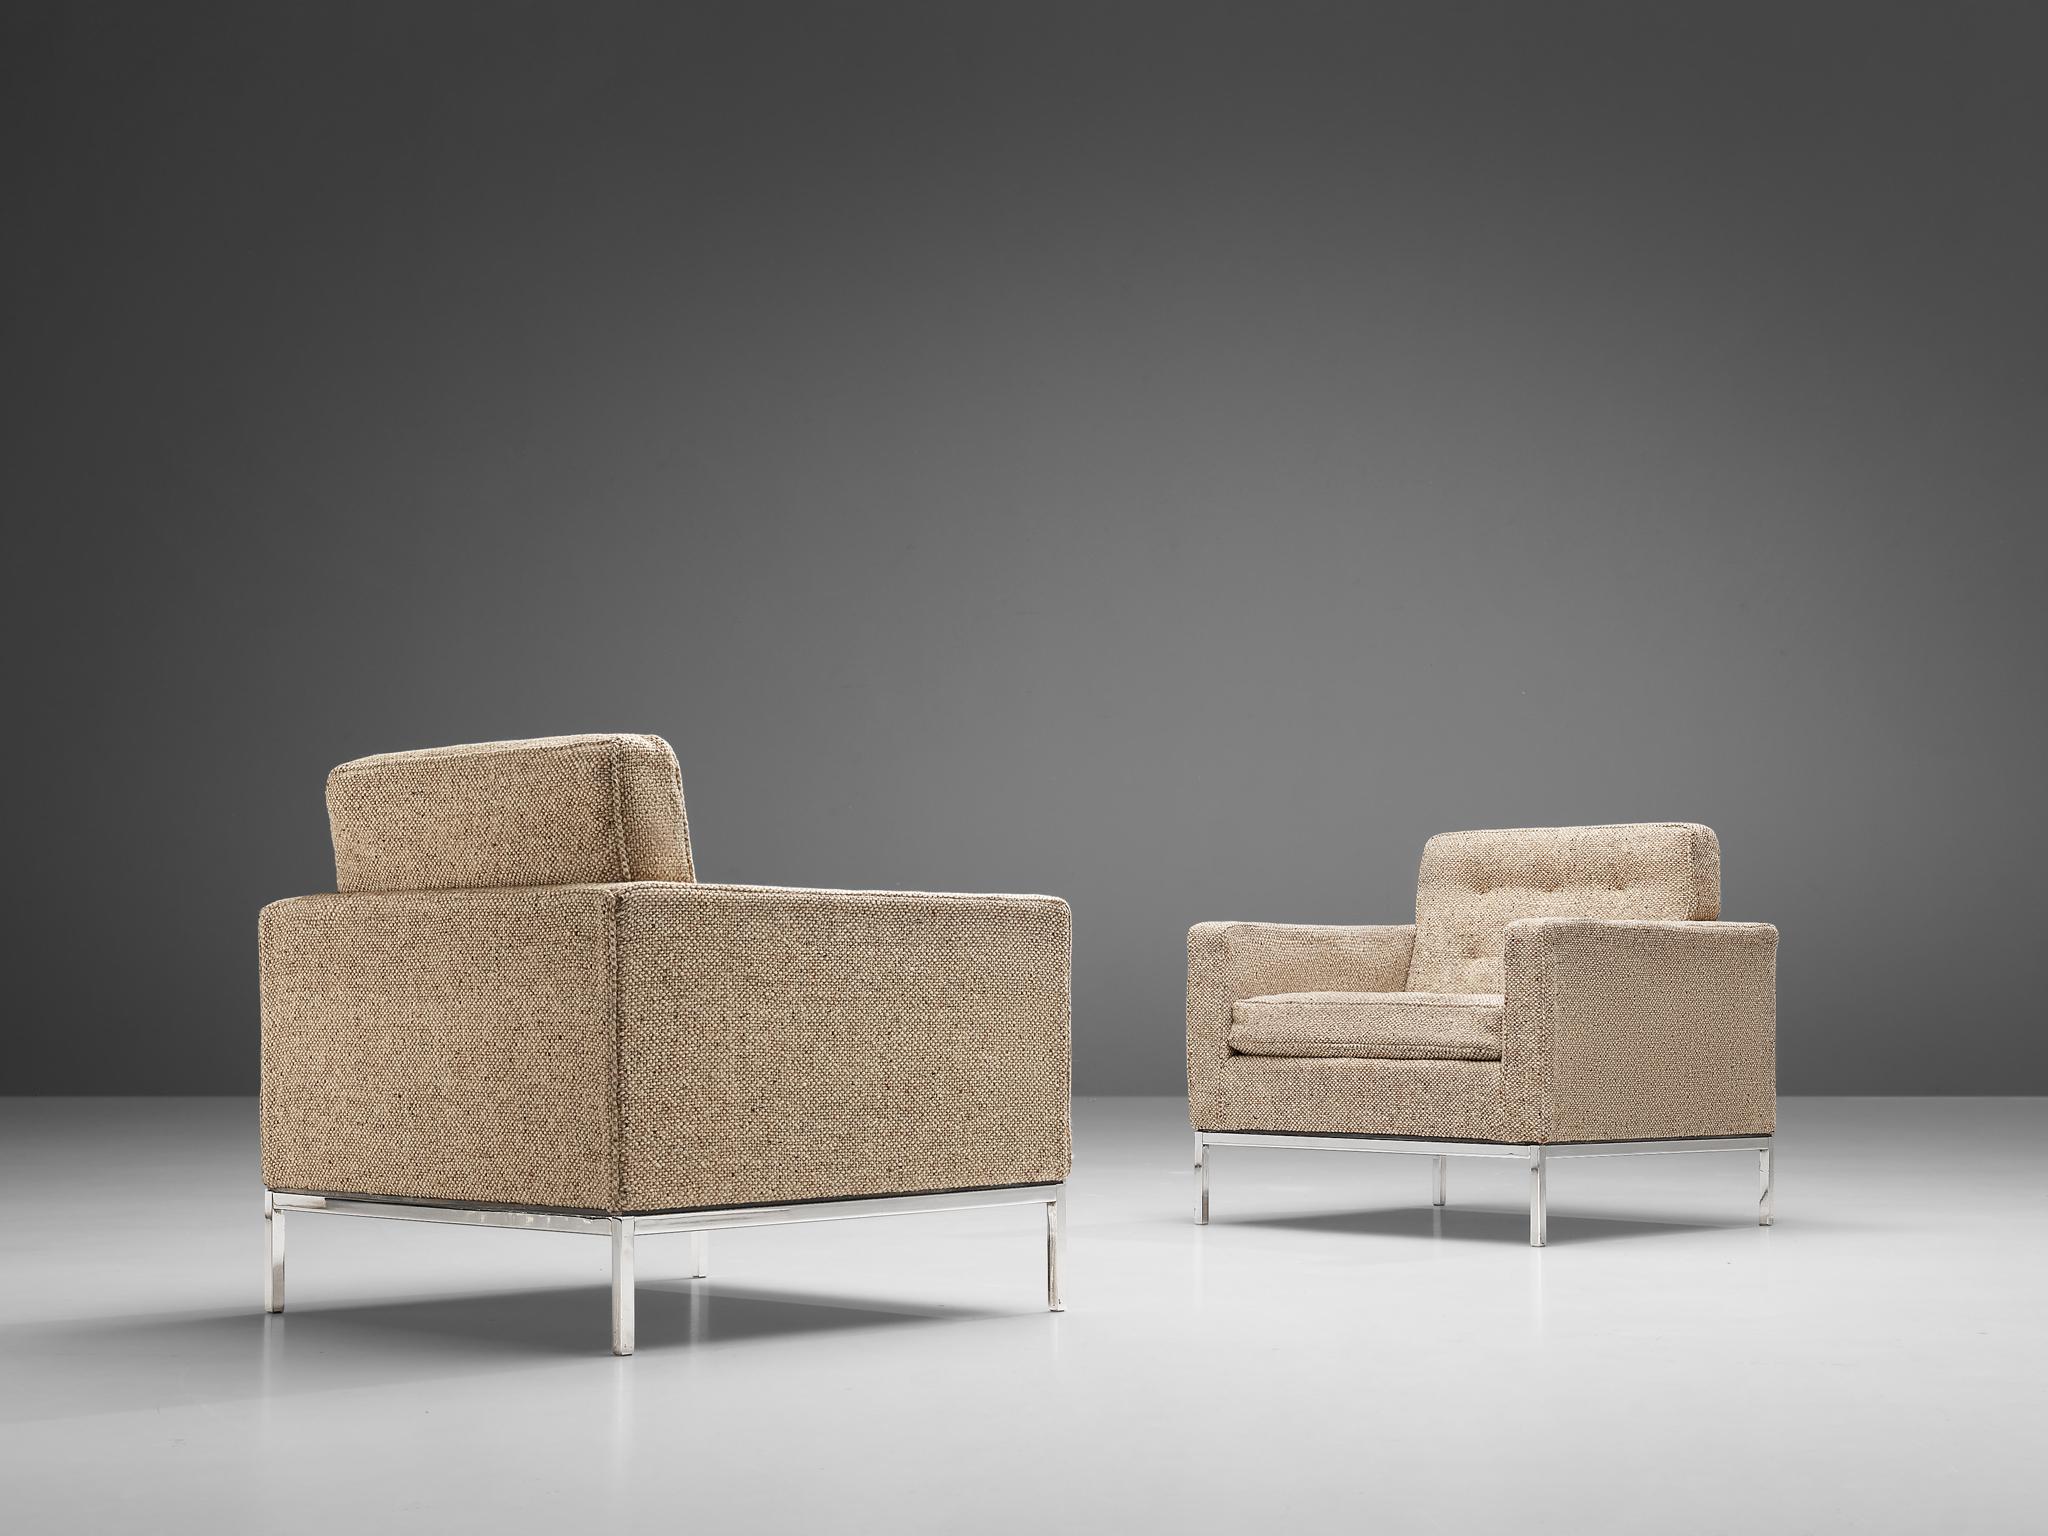 Artifort, lounge chair model '905', metal, fabric upholstery, the Netherlands, design 1964

The Artifort '905' armchair was designed by the company in 1964. Although the design was created in the sixties, thanks to its very modest and clean look, it